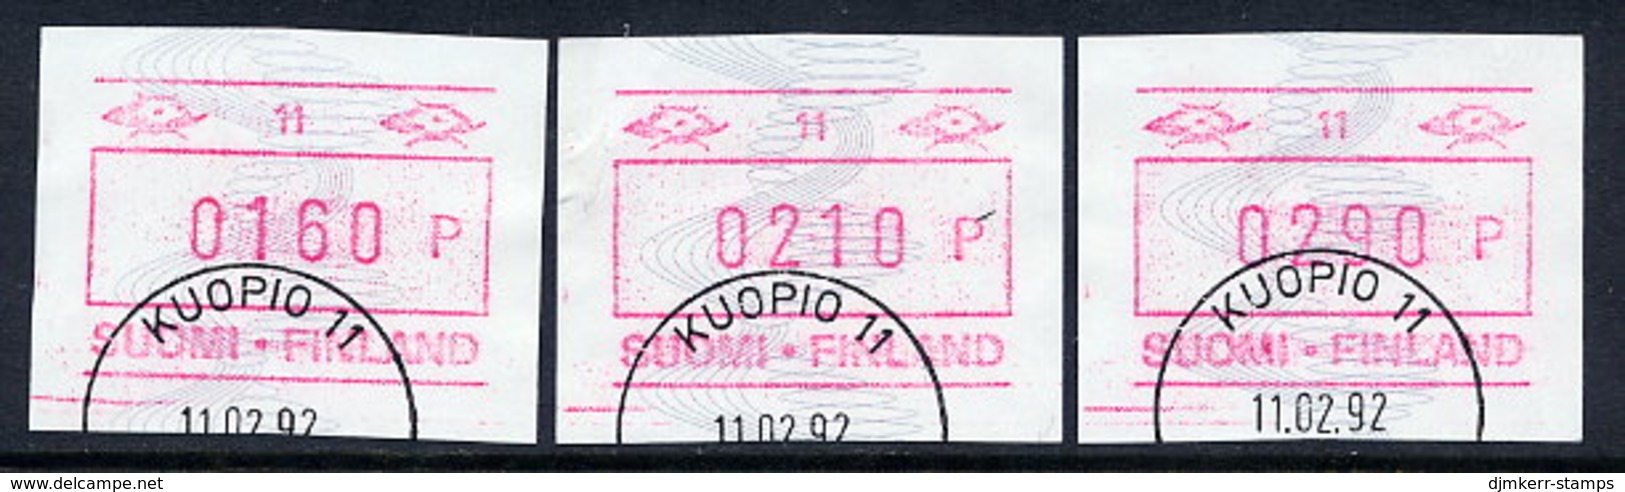 FINLAND 1990 Definitive With ATM Number , 3 Different Values Used .Michel 8 - Timbres De Distributeurs [ATM]